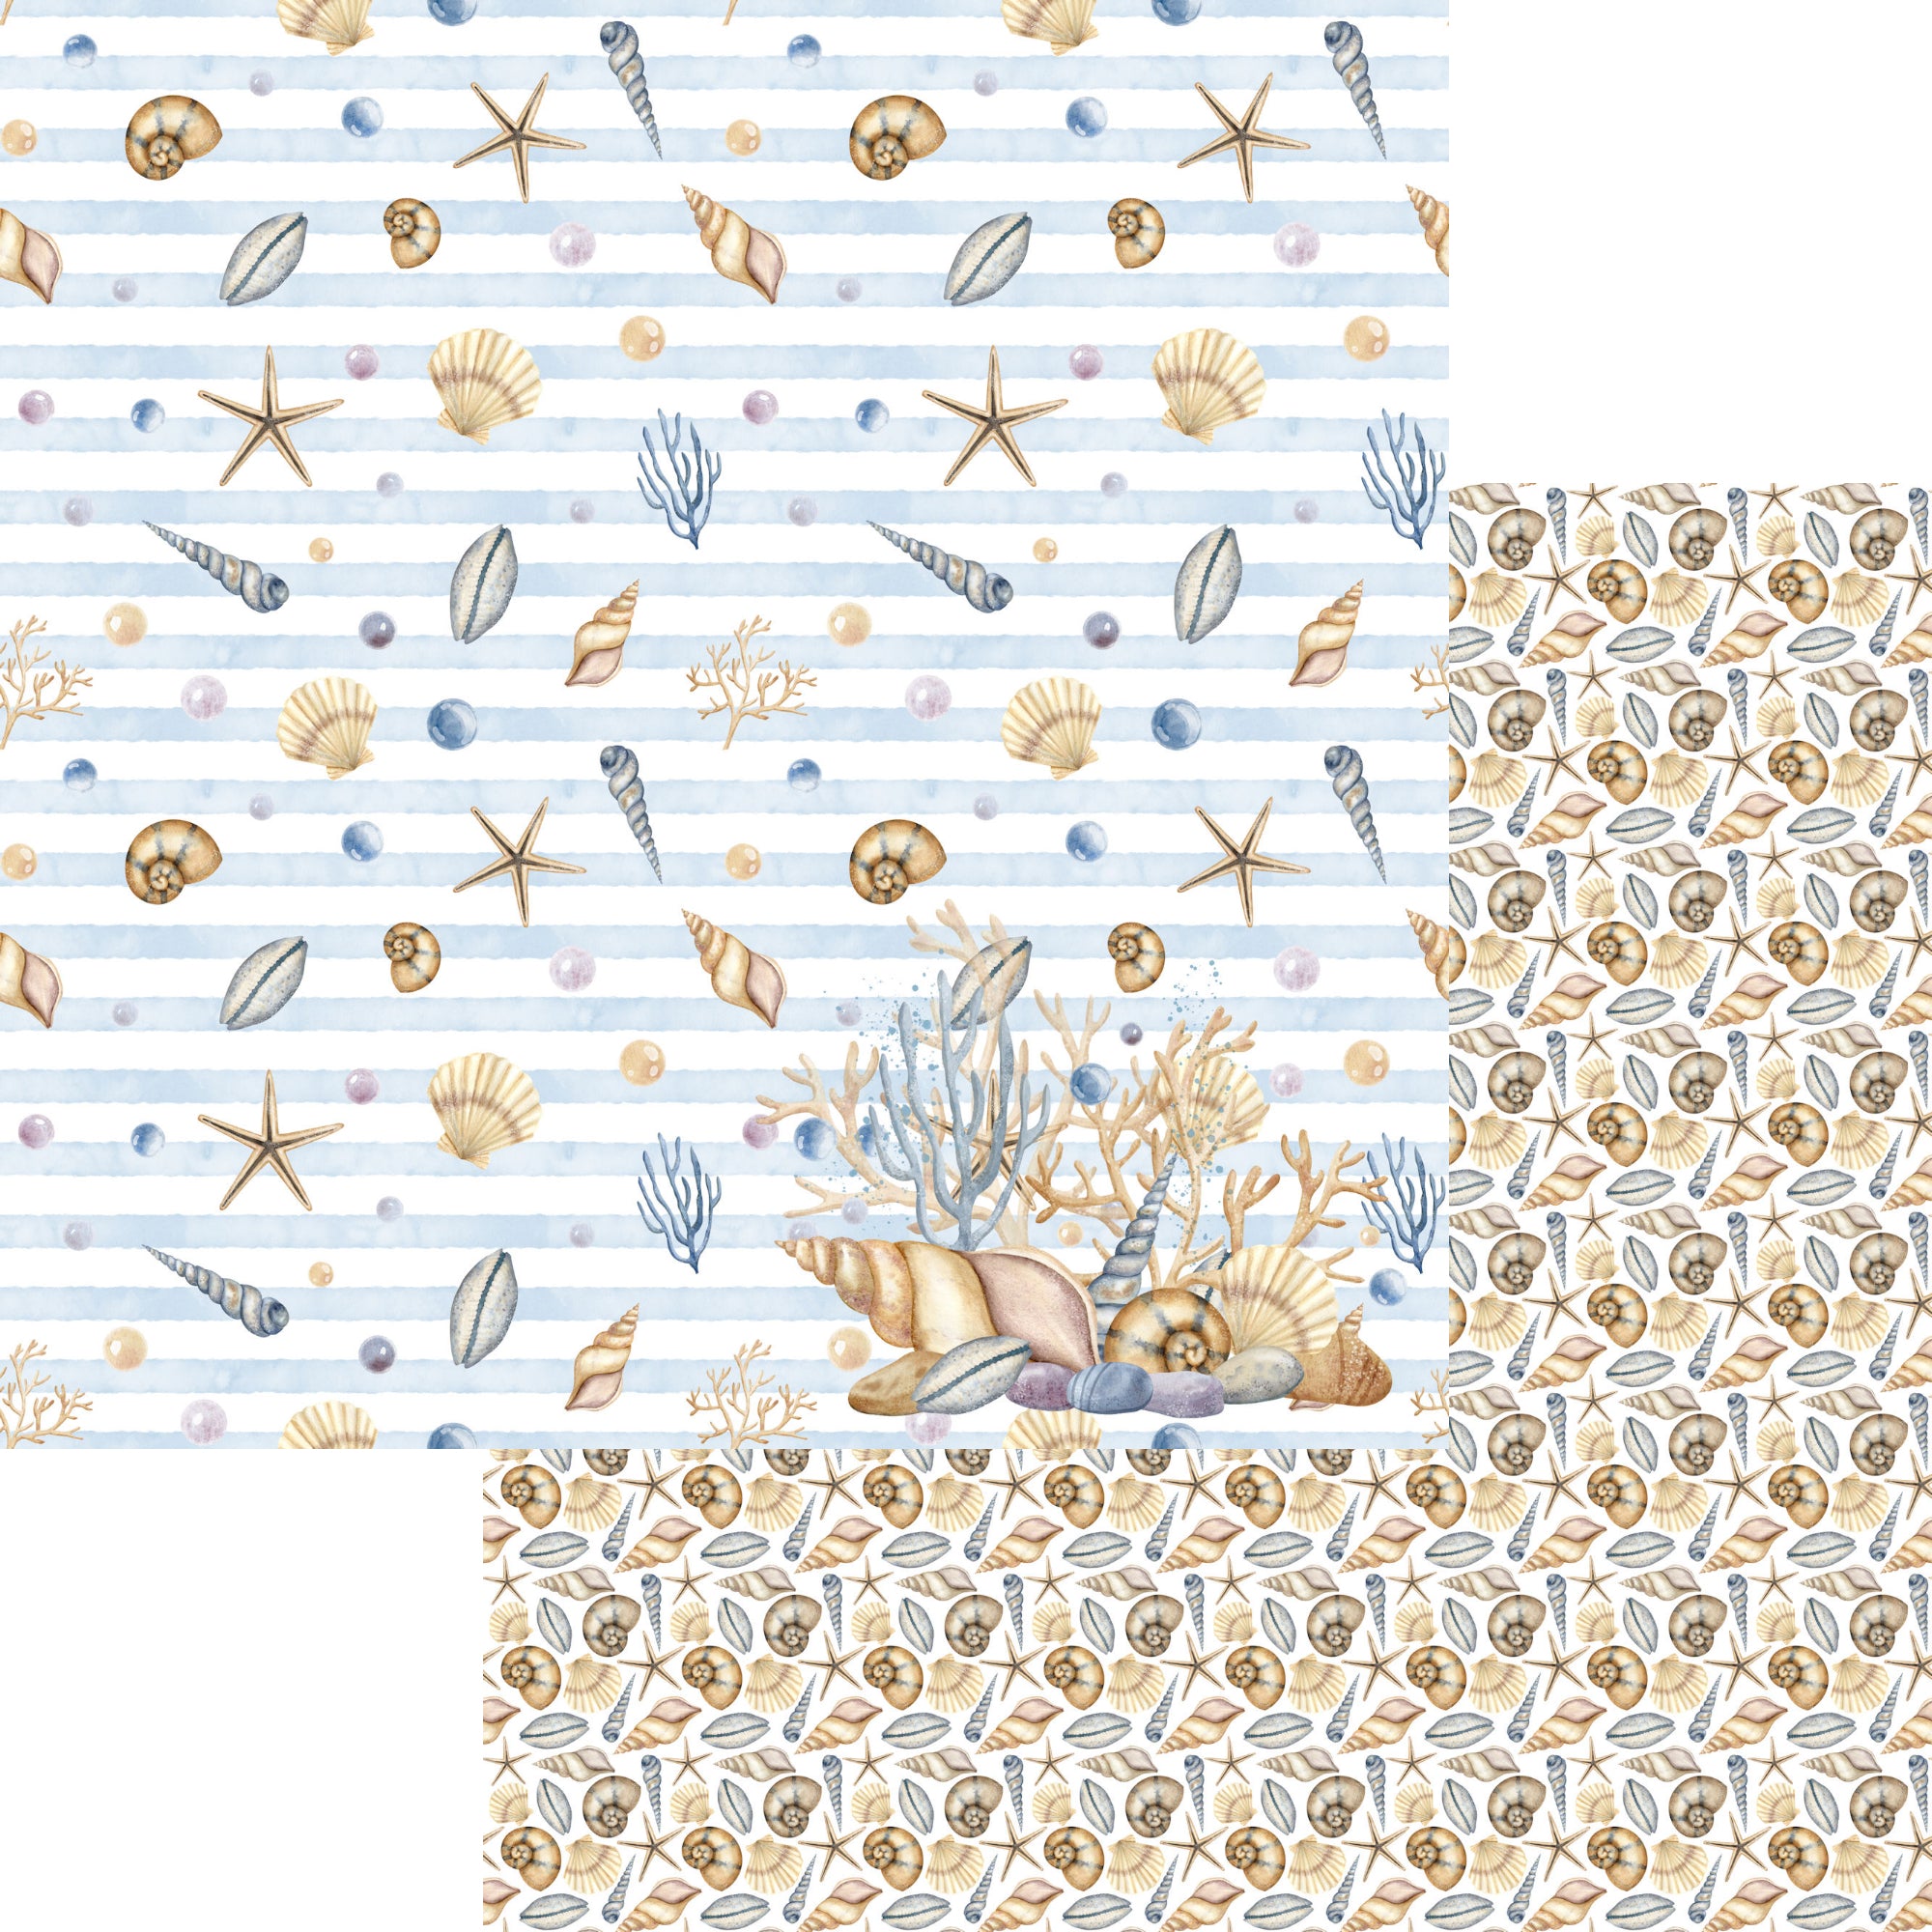 Seaside Dreams Collection Ocean 12 x 12 Double-Sided Scrapbook Paper by SSC Designs